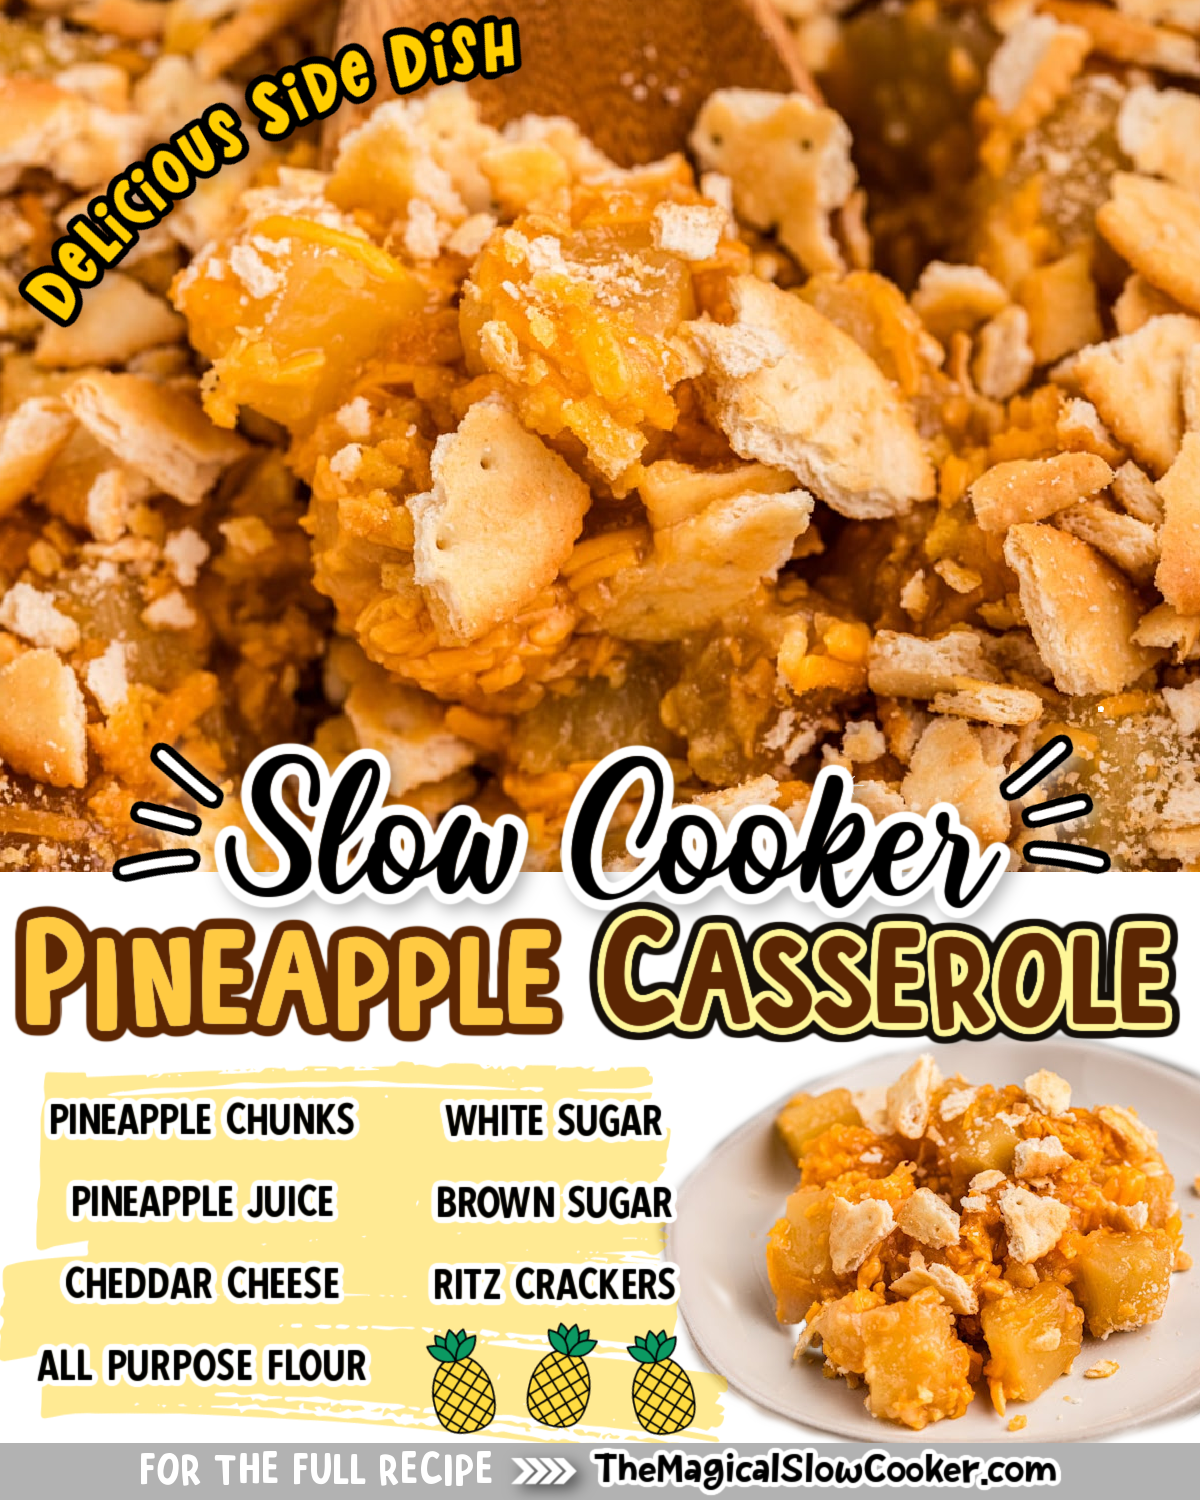 images of pineapple casserole with text of what the ingredients are for facebook.